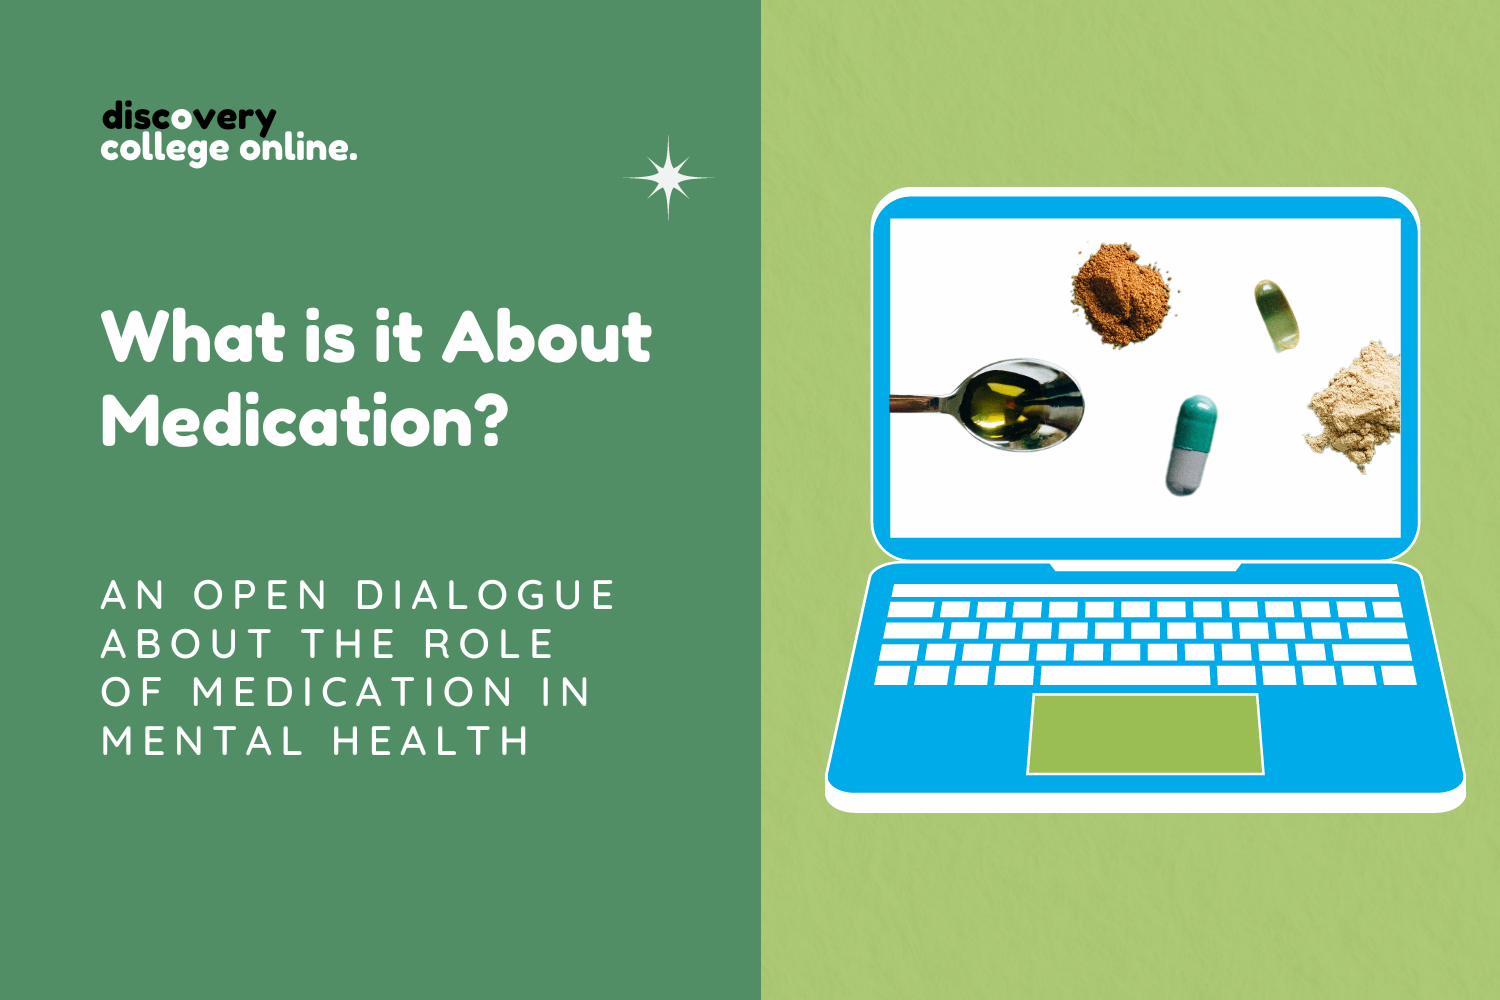 A background with light and dark green. A blue laptop with images of a spoon with medicine and different coloured tablets. It reads, discovery college online. What is it about medication? An open dialogue about the role of medication in mental health.